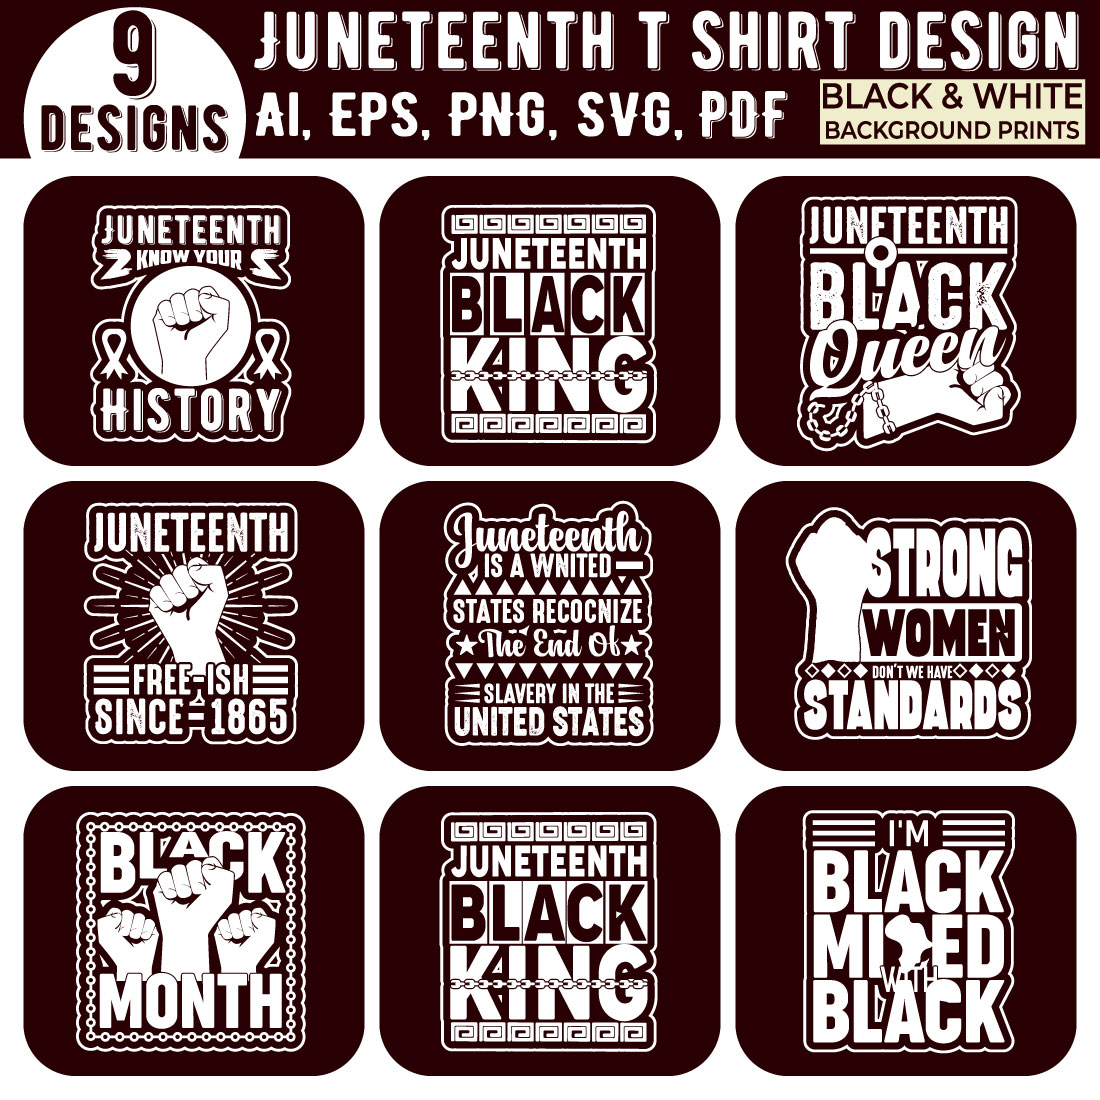 Juneteenth Black history month typography t shirt design preview image.